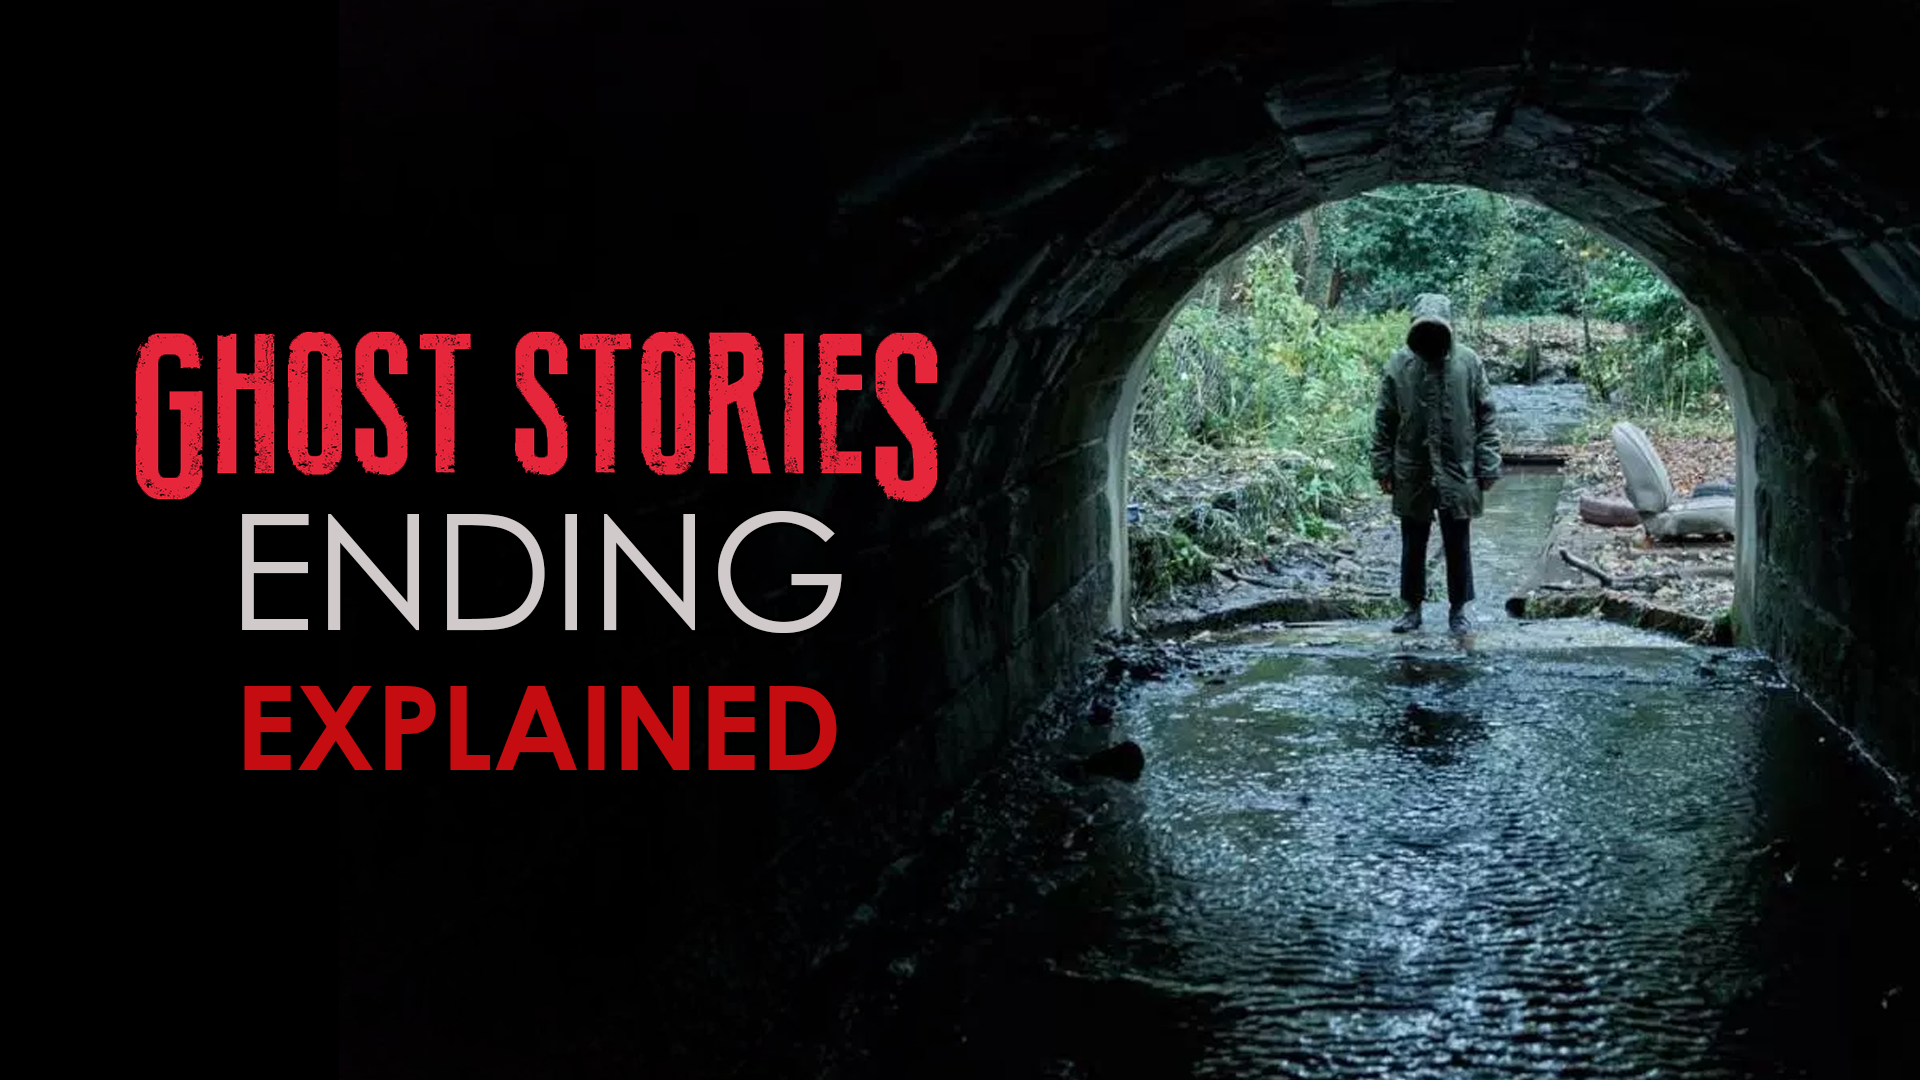 ghost stories ending explained by Deffinition includes full spoilers as well as what the ghost stories are